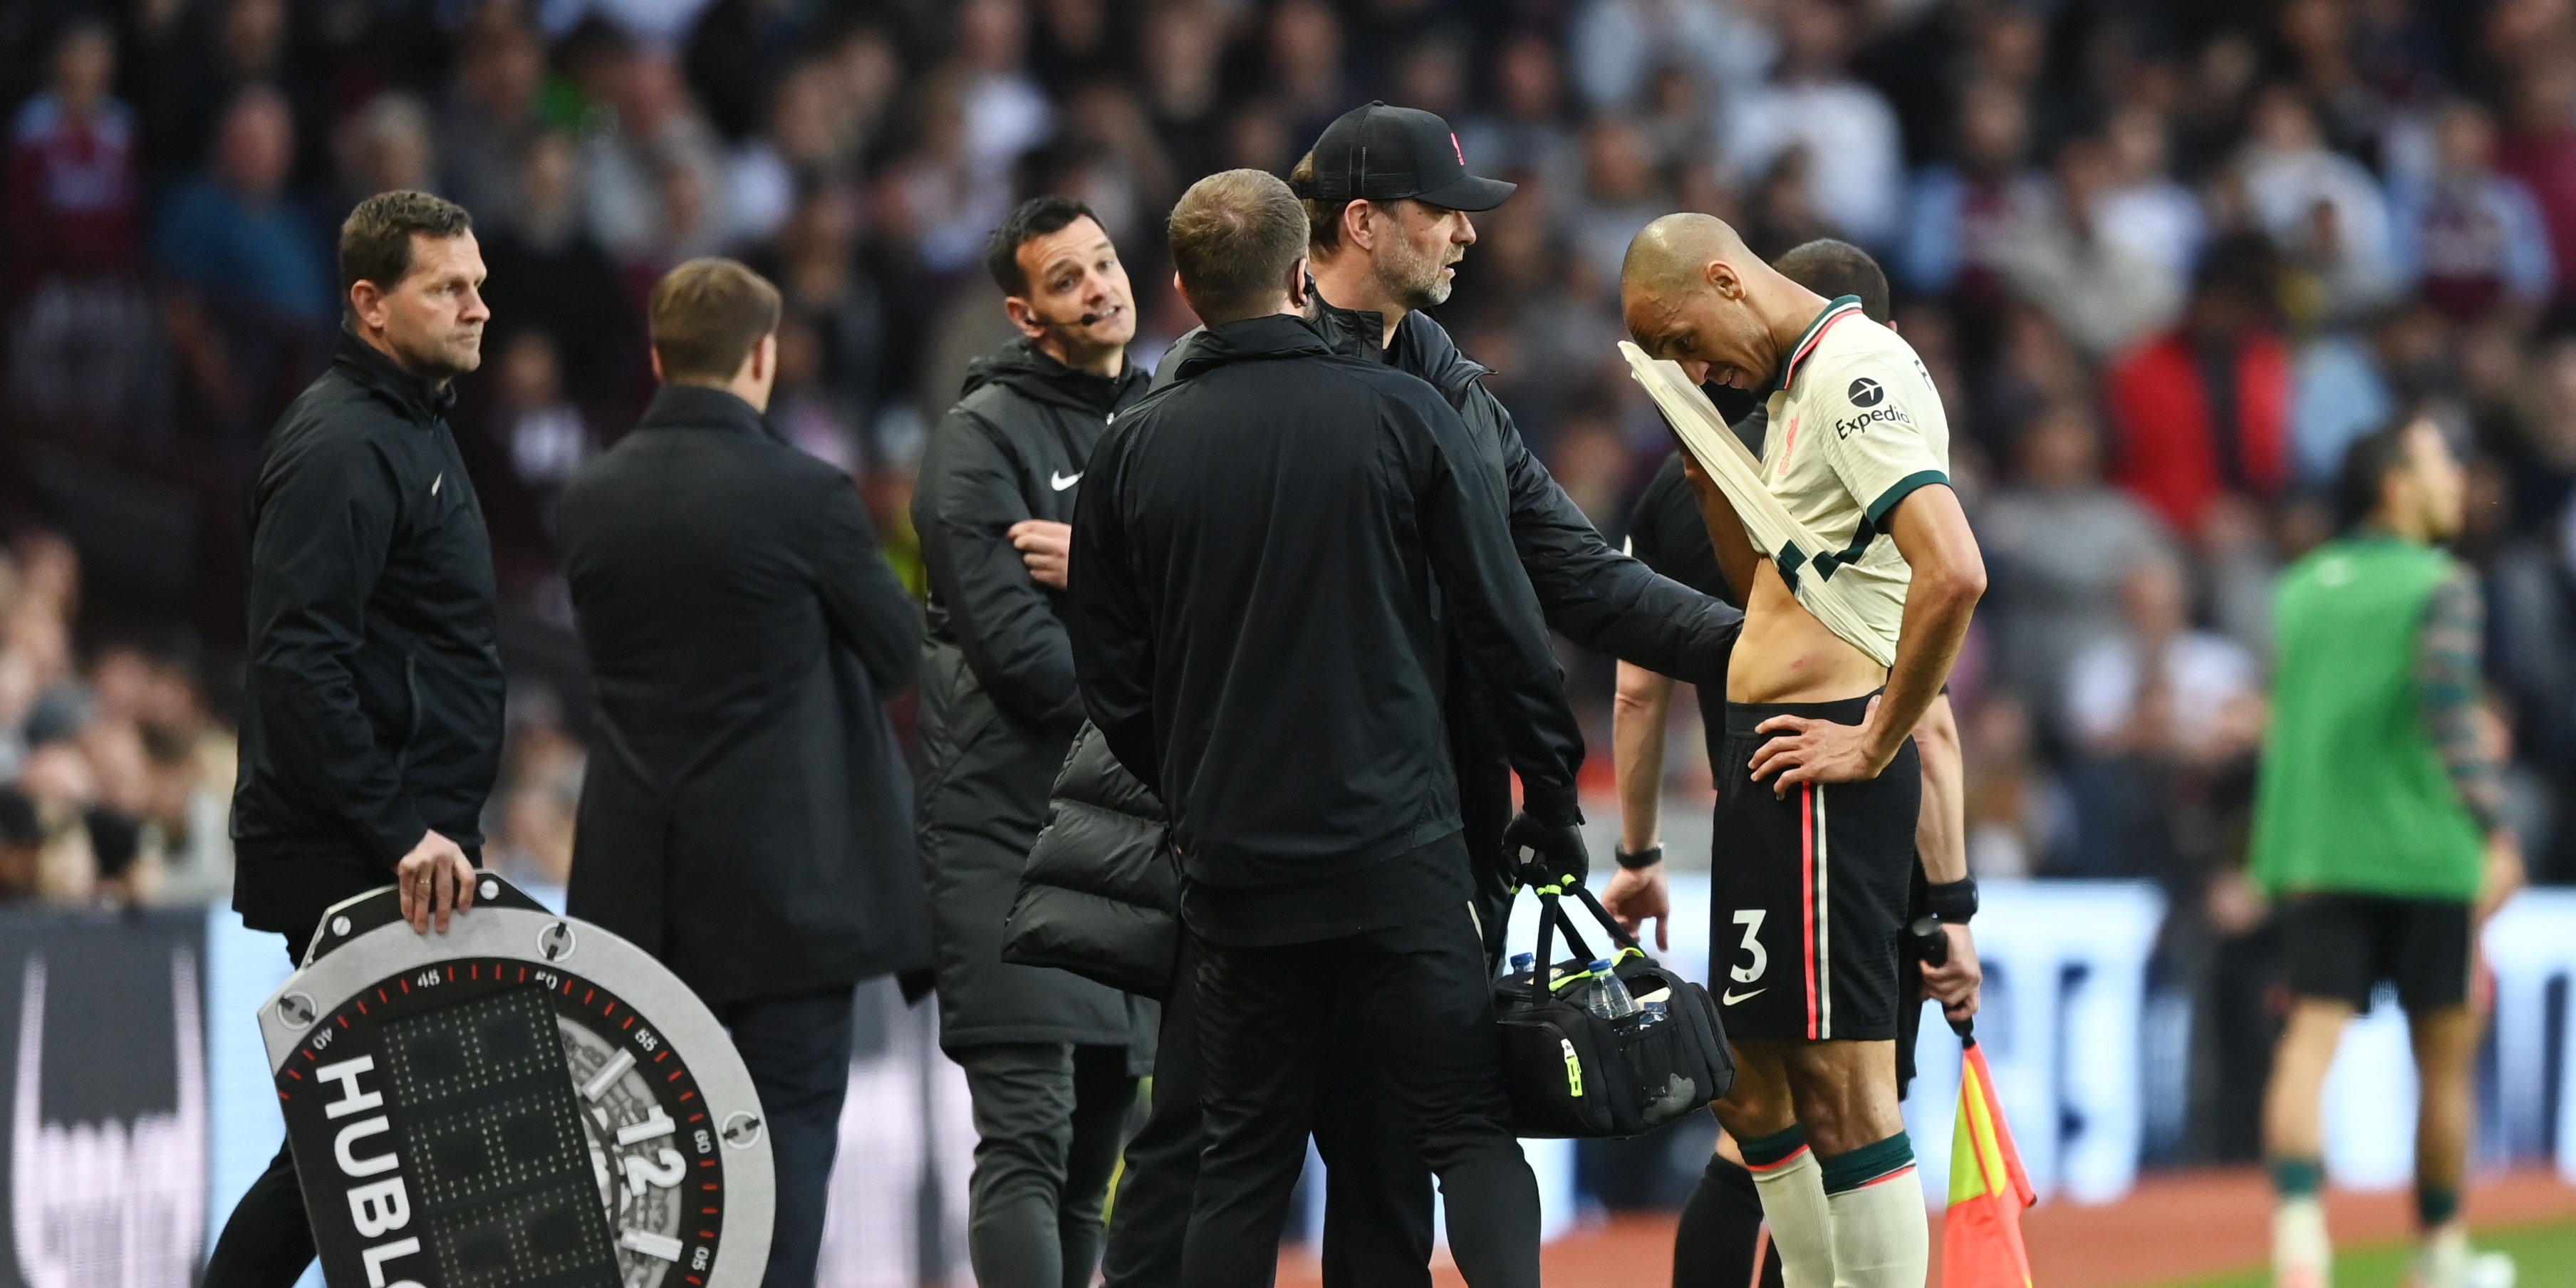 ‘It’s bad news’ – Neil Jones shares latest injury update on Fabinho amid fears over Champions League final availability